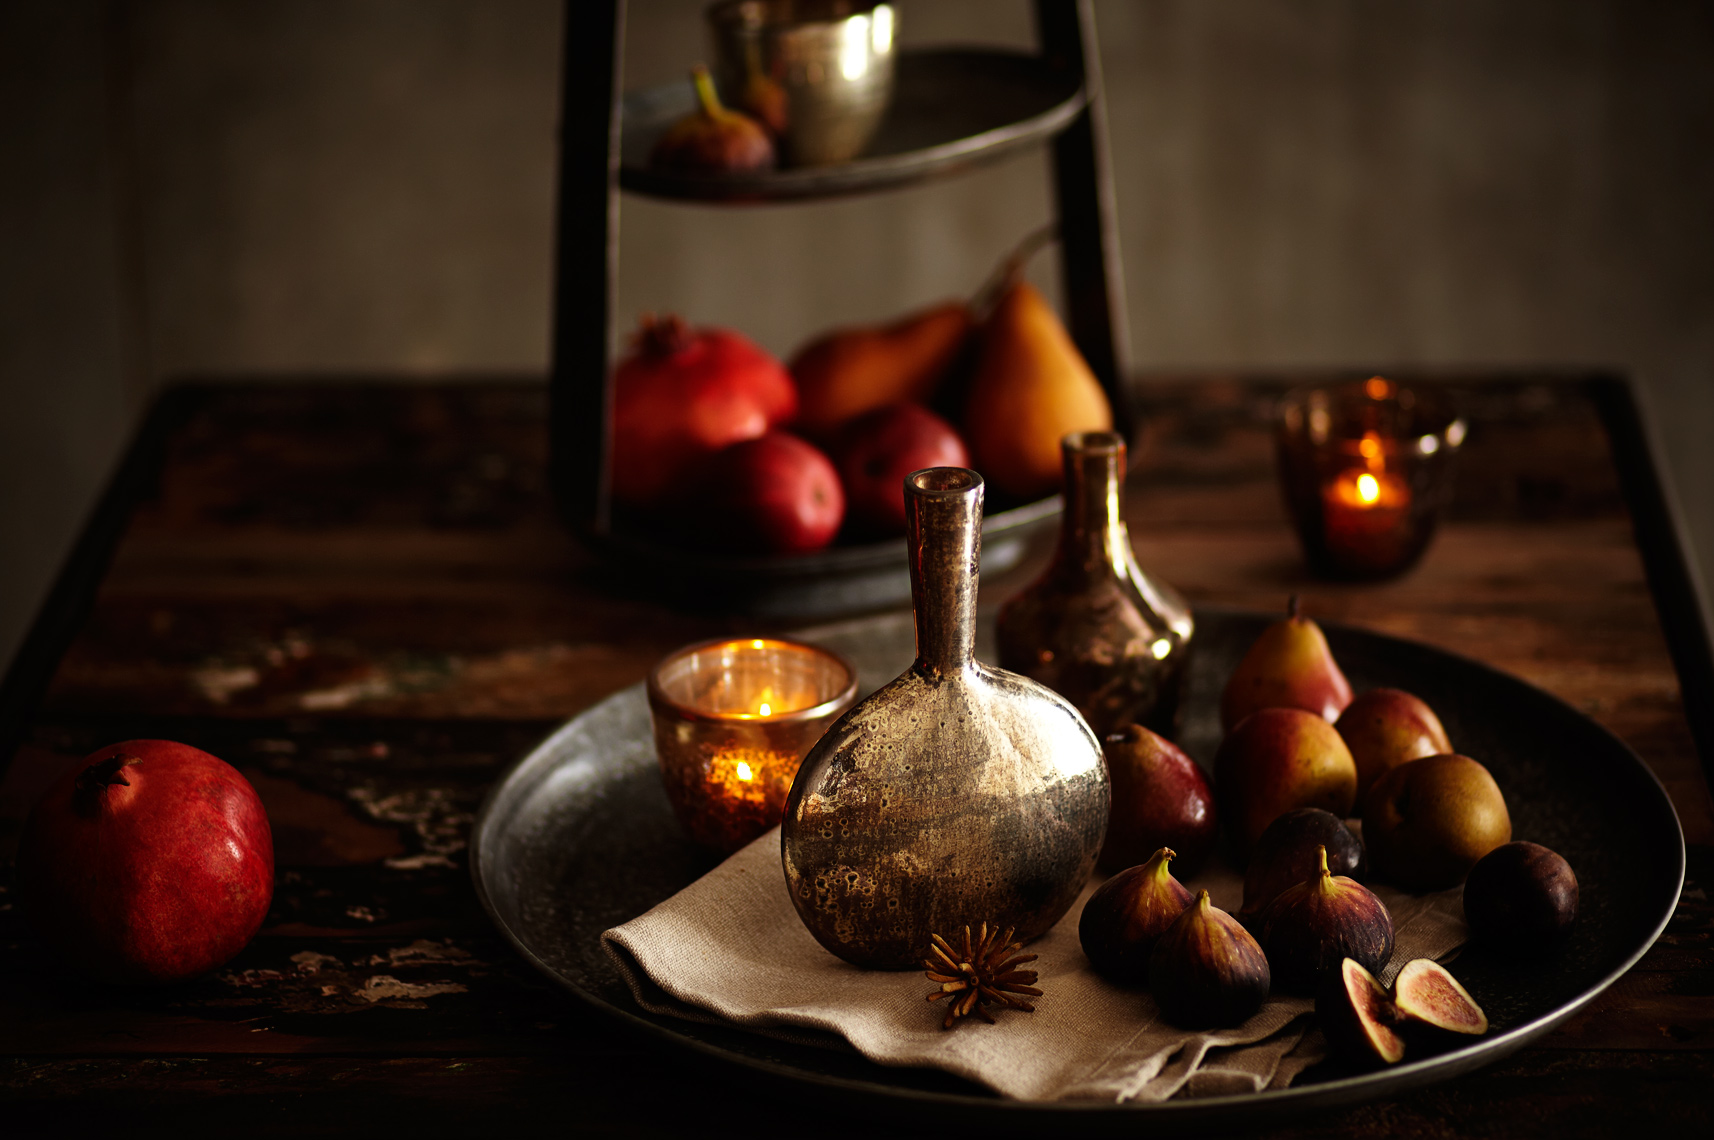 Home_Cover_FoodTable_W_VOTIVES_058_RT_Crop.jpg